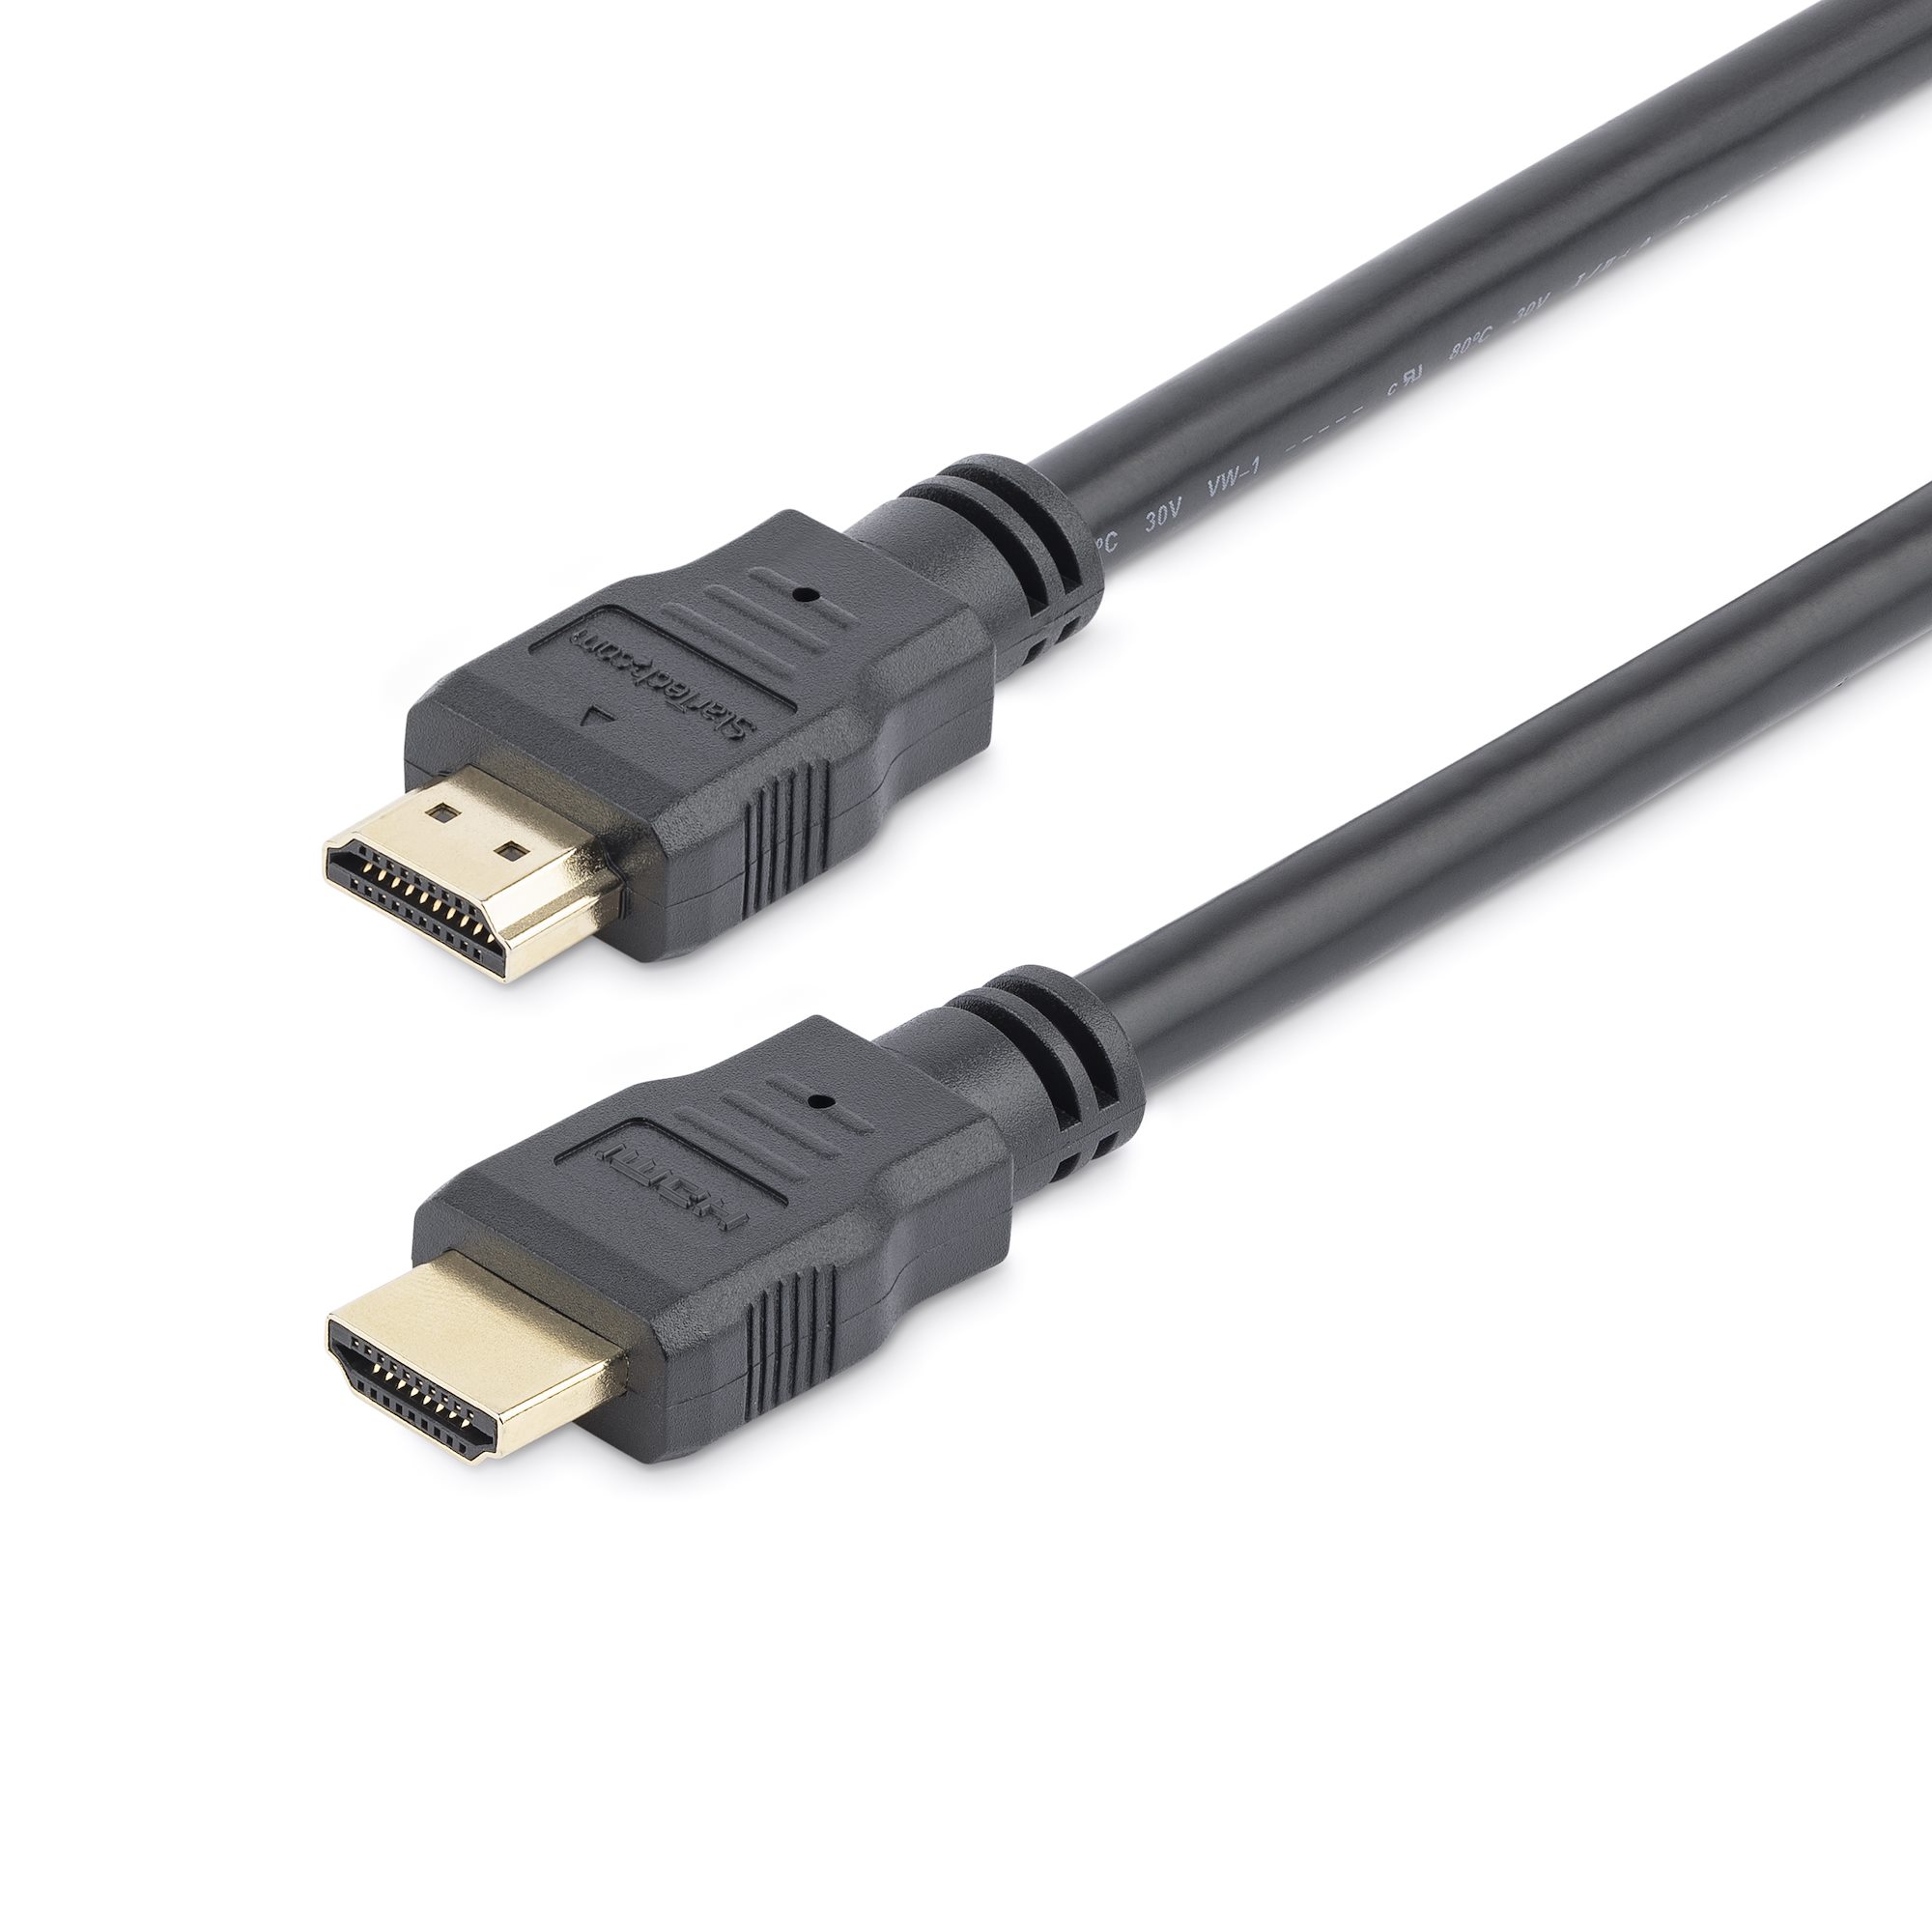 【HDMM3】3 FT HIGH SPEED HDMI CABLE - ULT